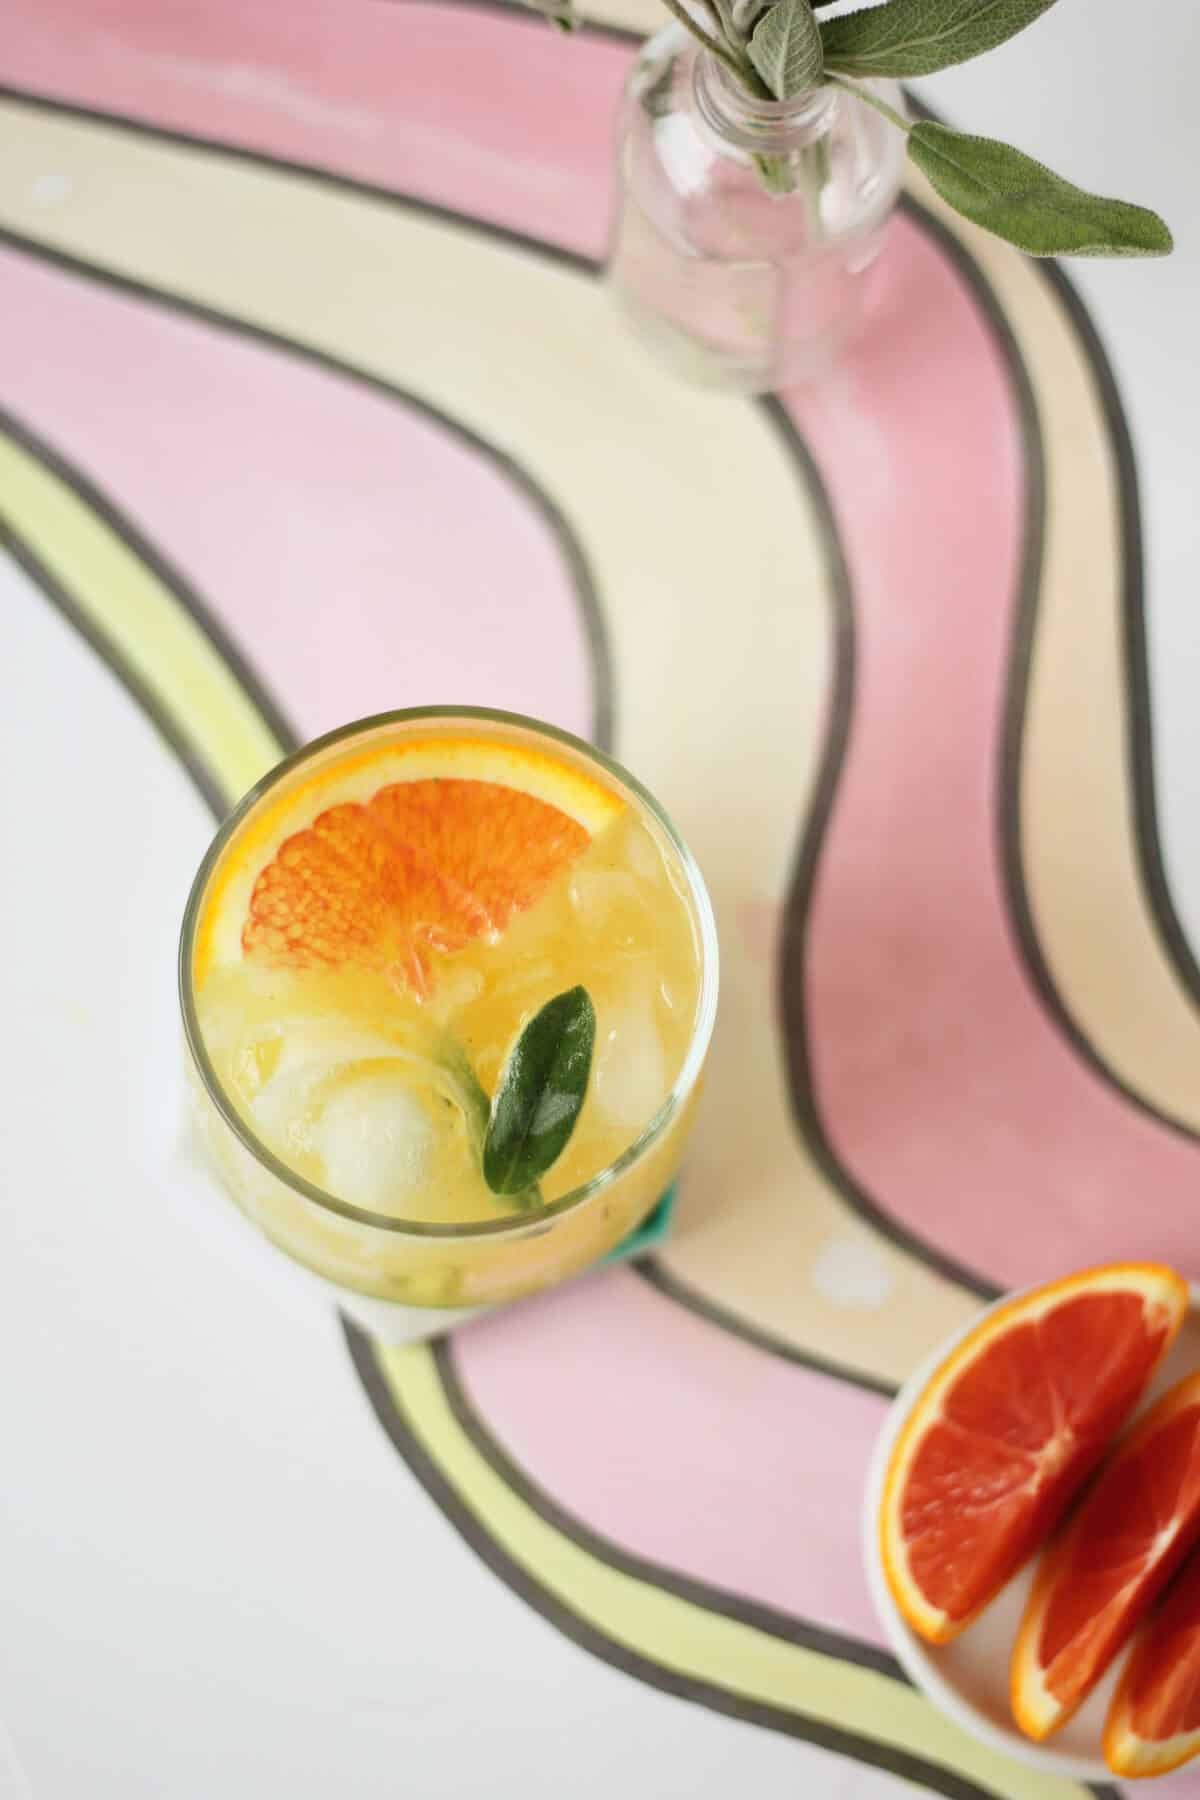 Overhead shot of a clear glass cup filled with ice, orange liquid, an orange slice, and a sage leaf. There's a mini bottle with a sprig of sage stuck in it, as well a dish with a few wedges of blood orange on it.